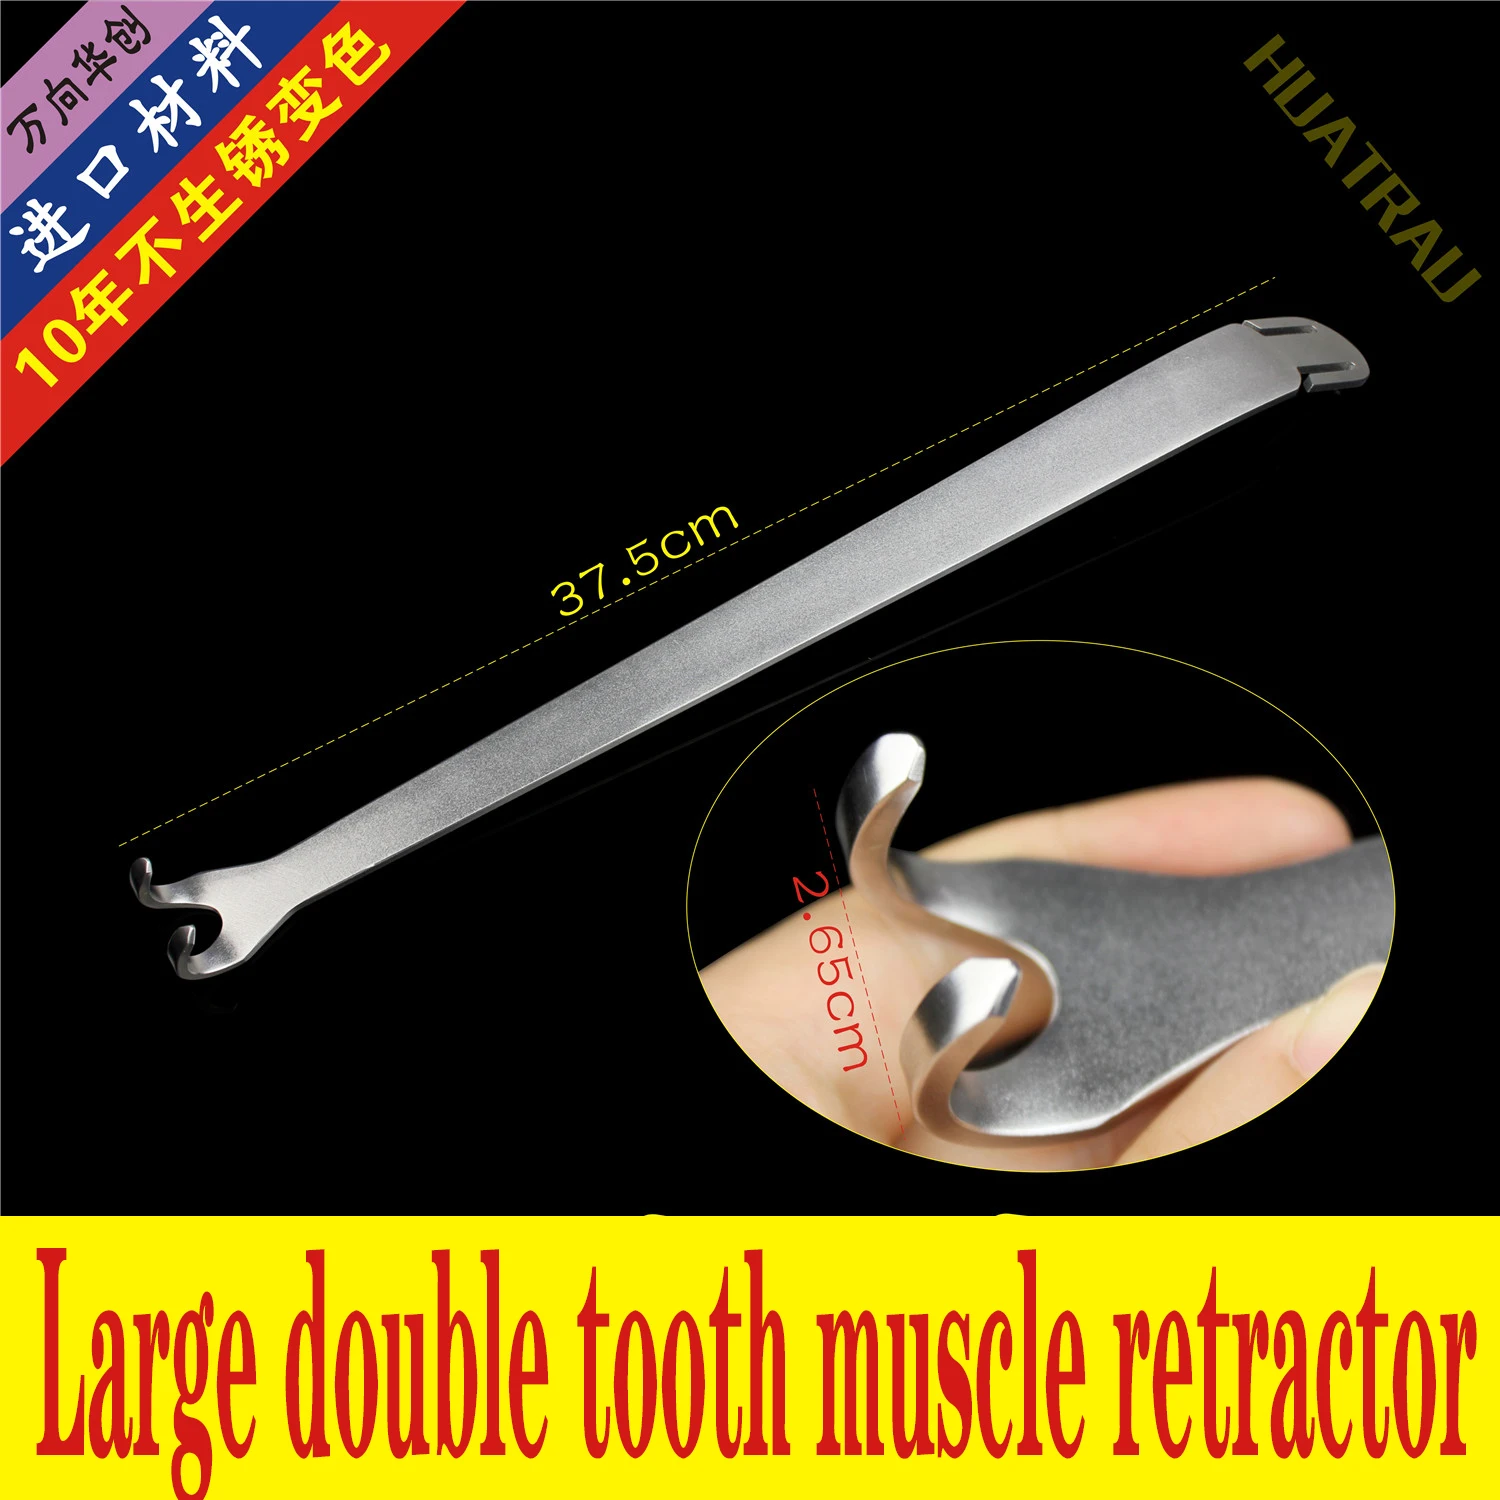 

Orthopaedic instruments medical large double 2 tooth muscle retractor Acetabular Knee joint ligament big muscle tissue hook tool